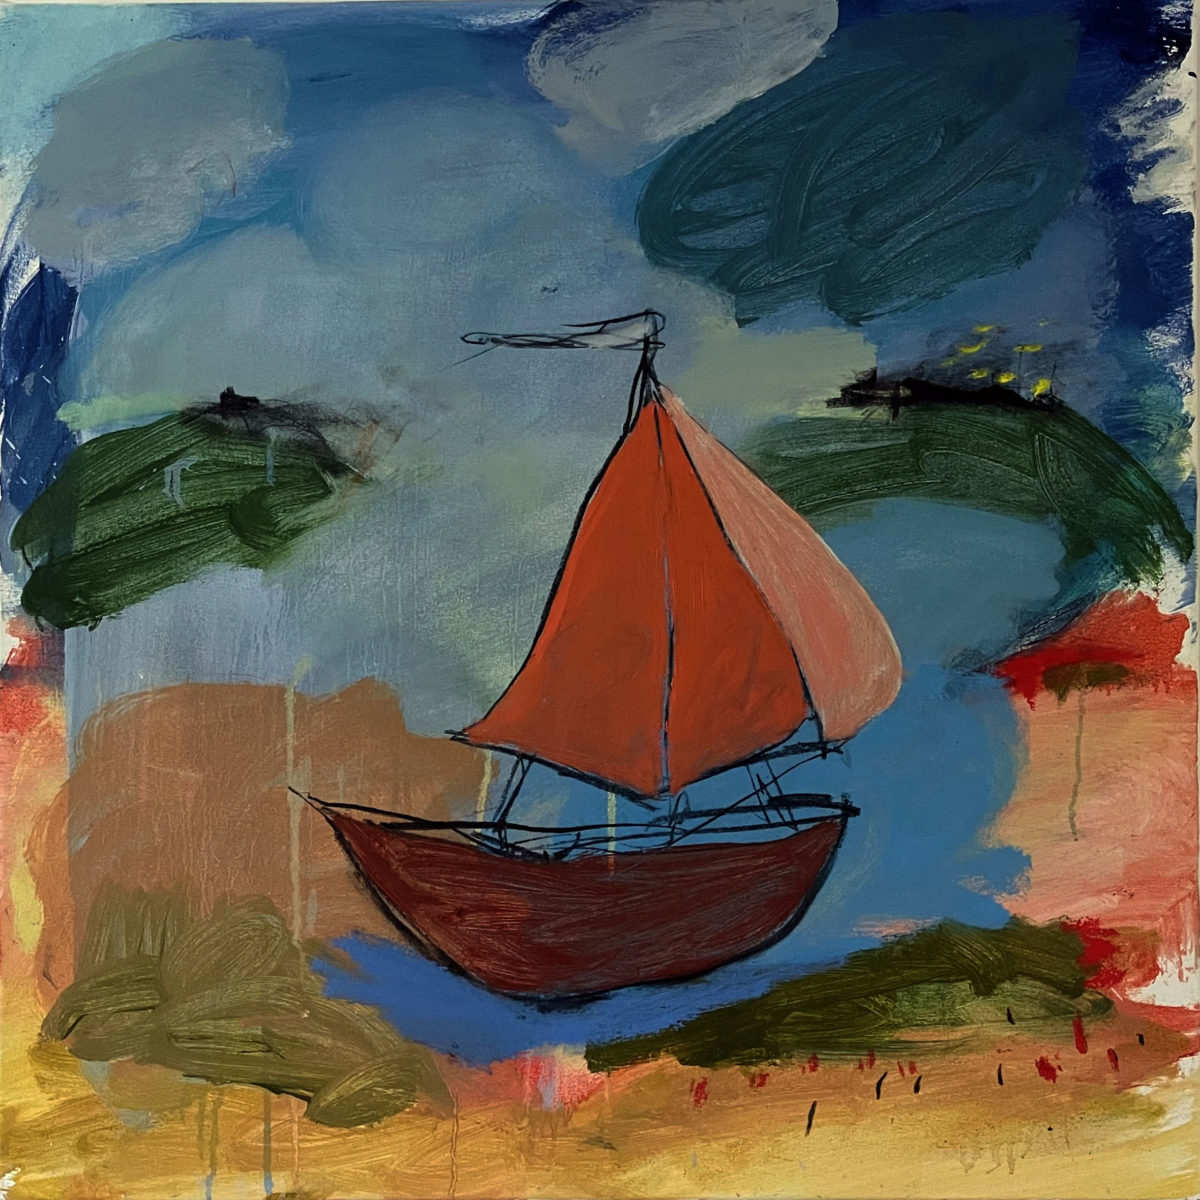 Tiny Boat 2022 | Sue Gill | Oil on canvas | 81 x 61 cm | SOLD